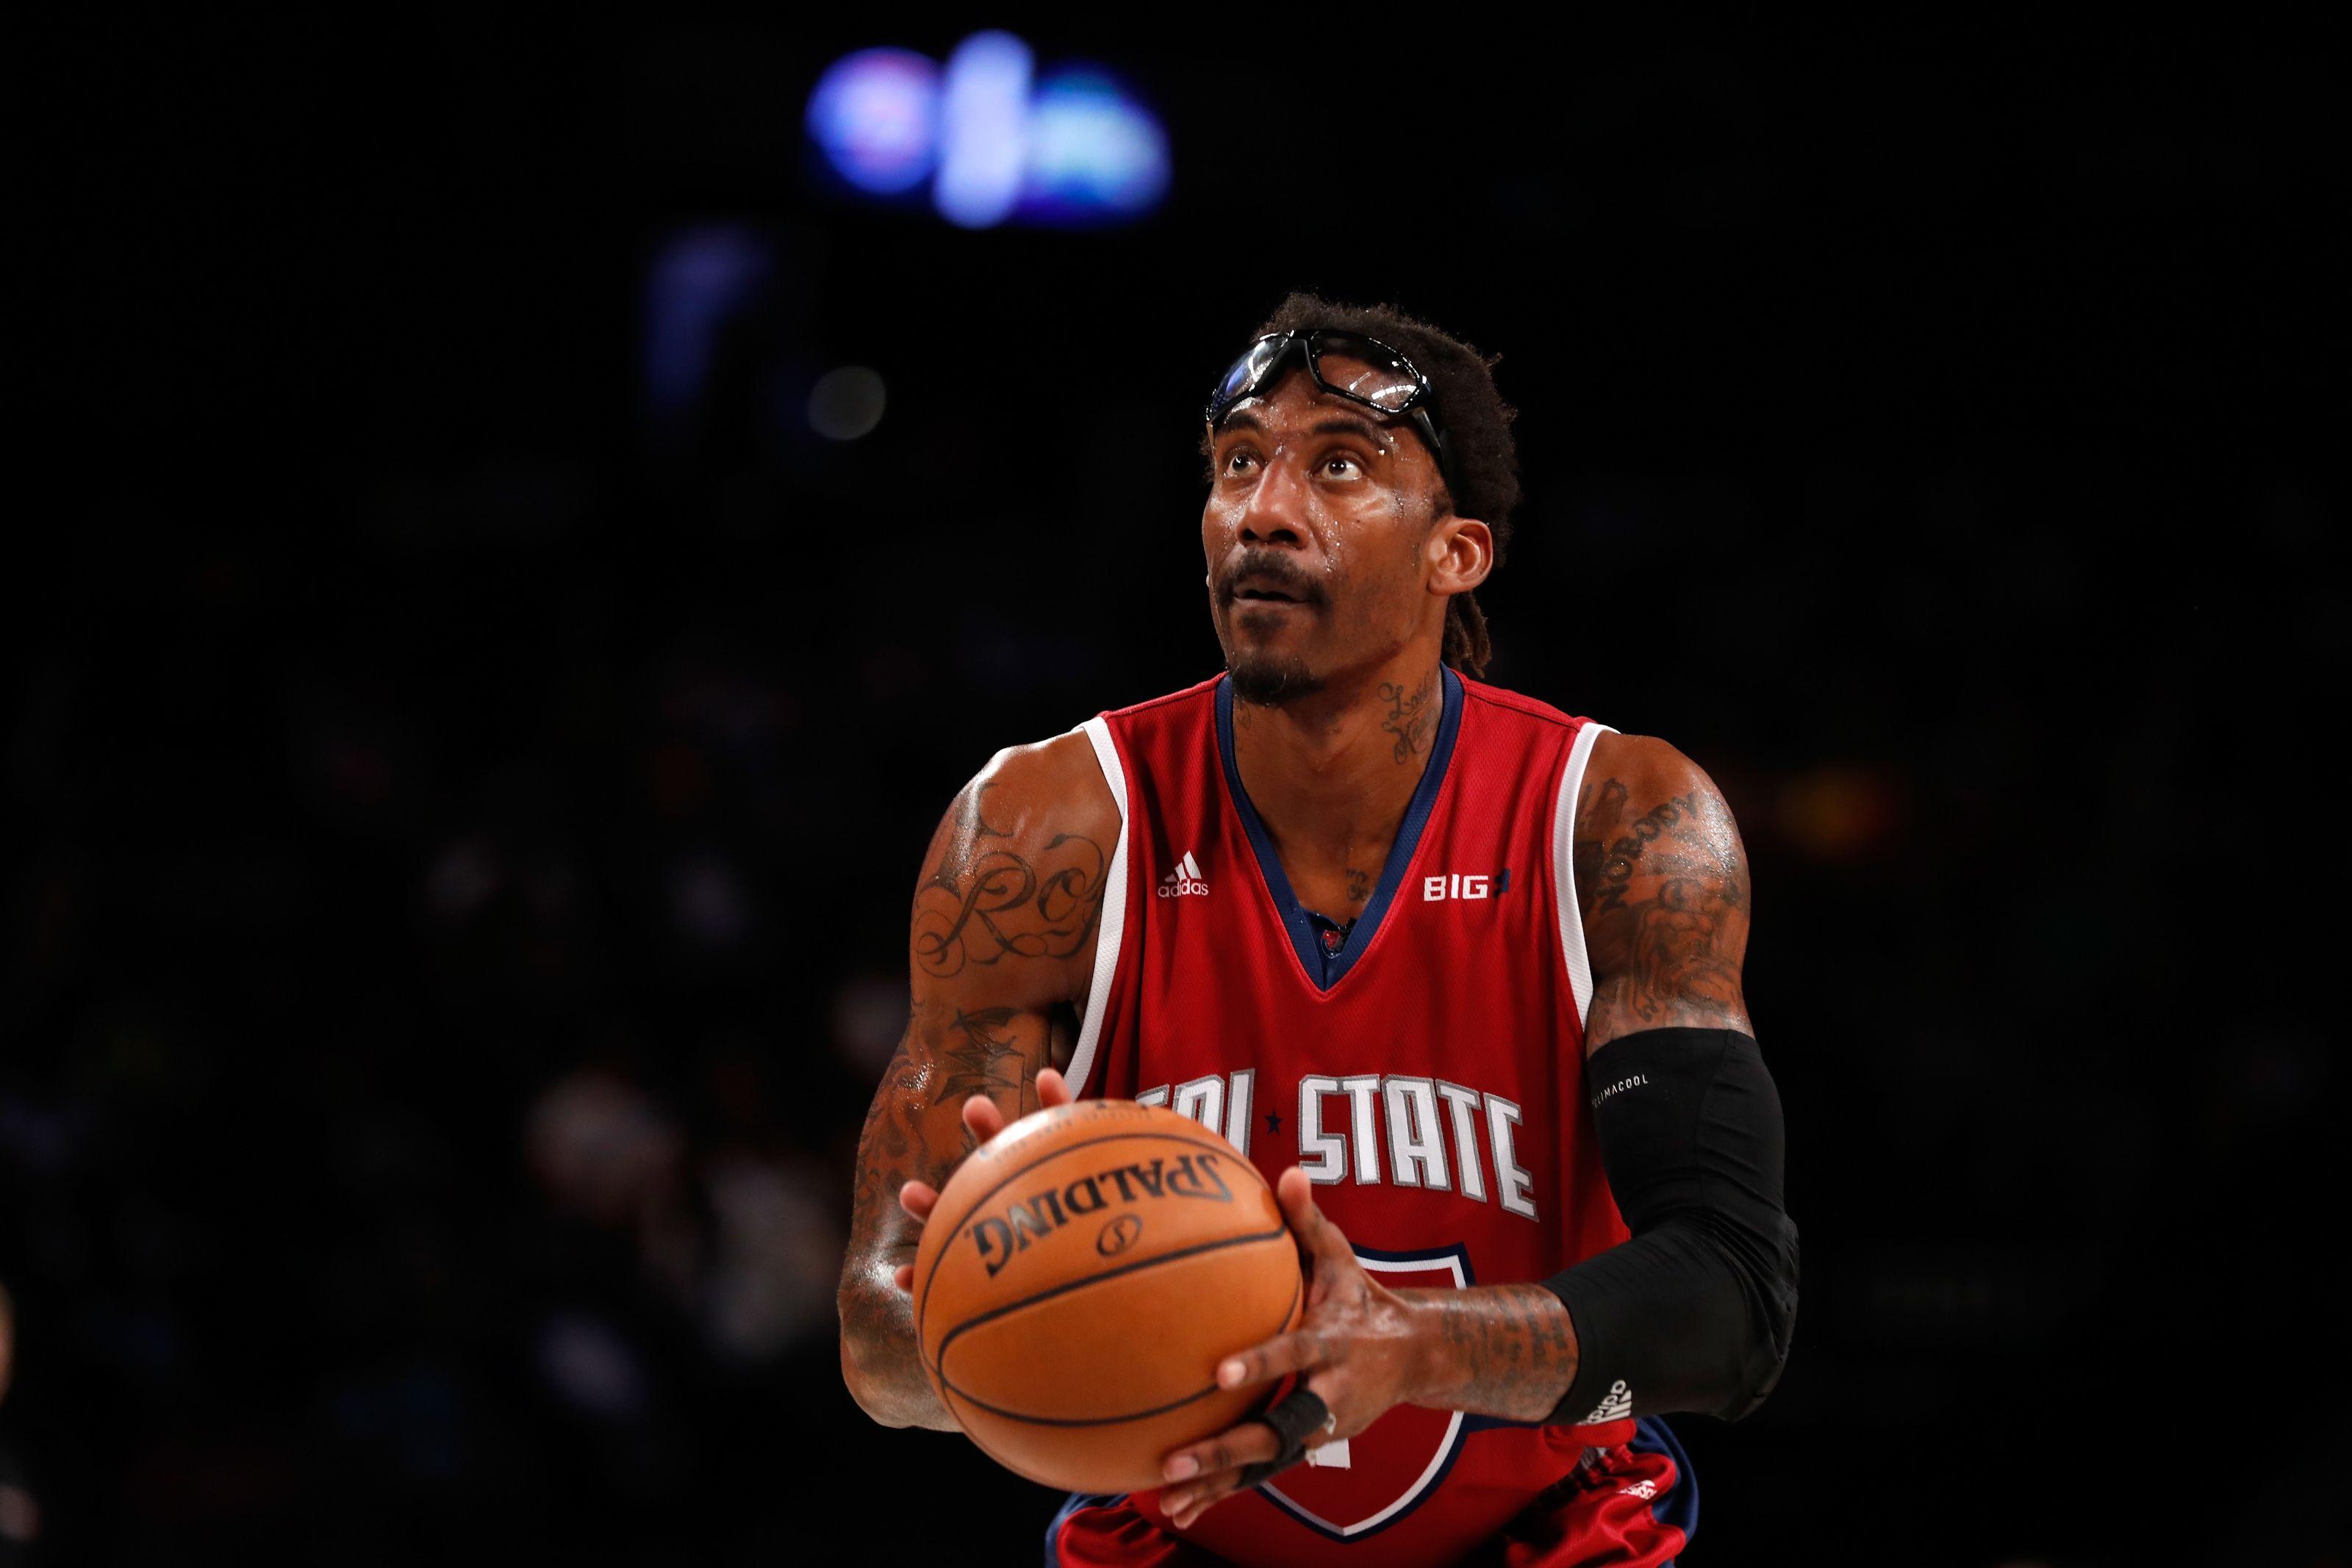 Amar'e Stoudemire seeking possible comeback with New York Knicks